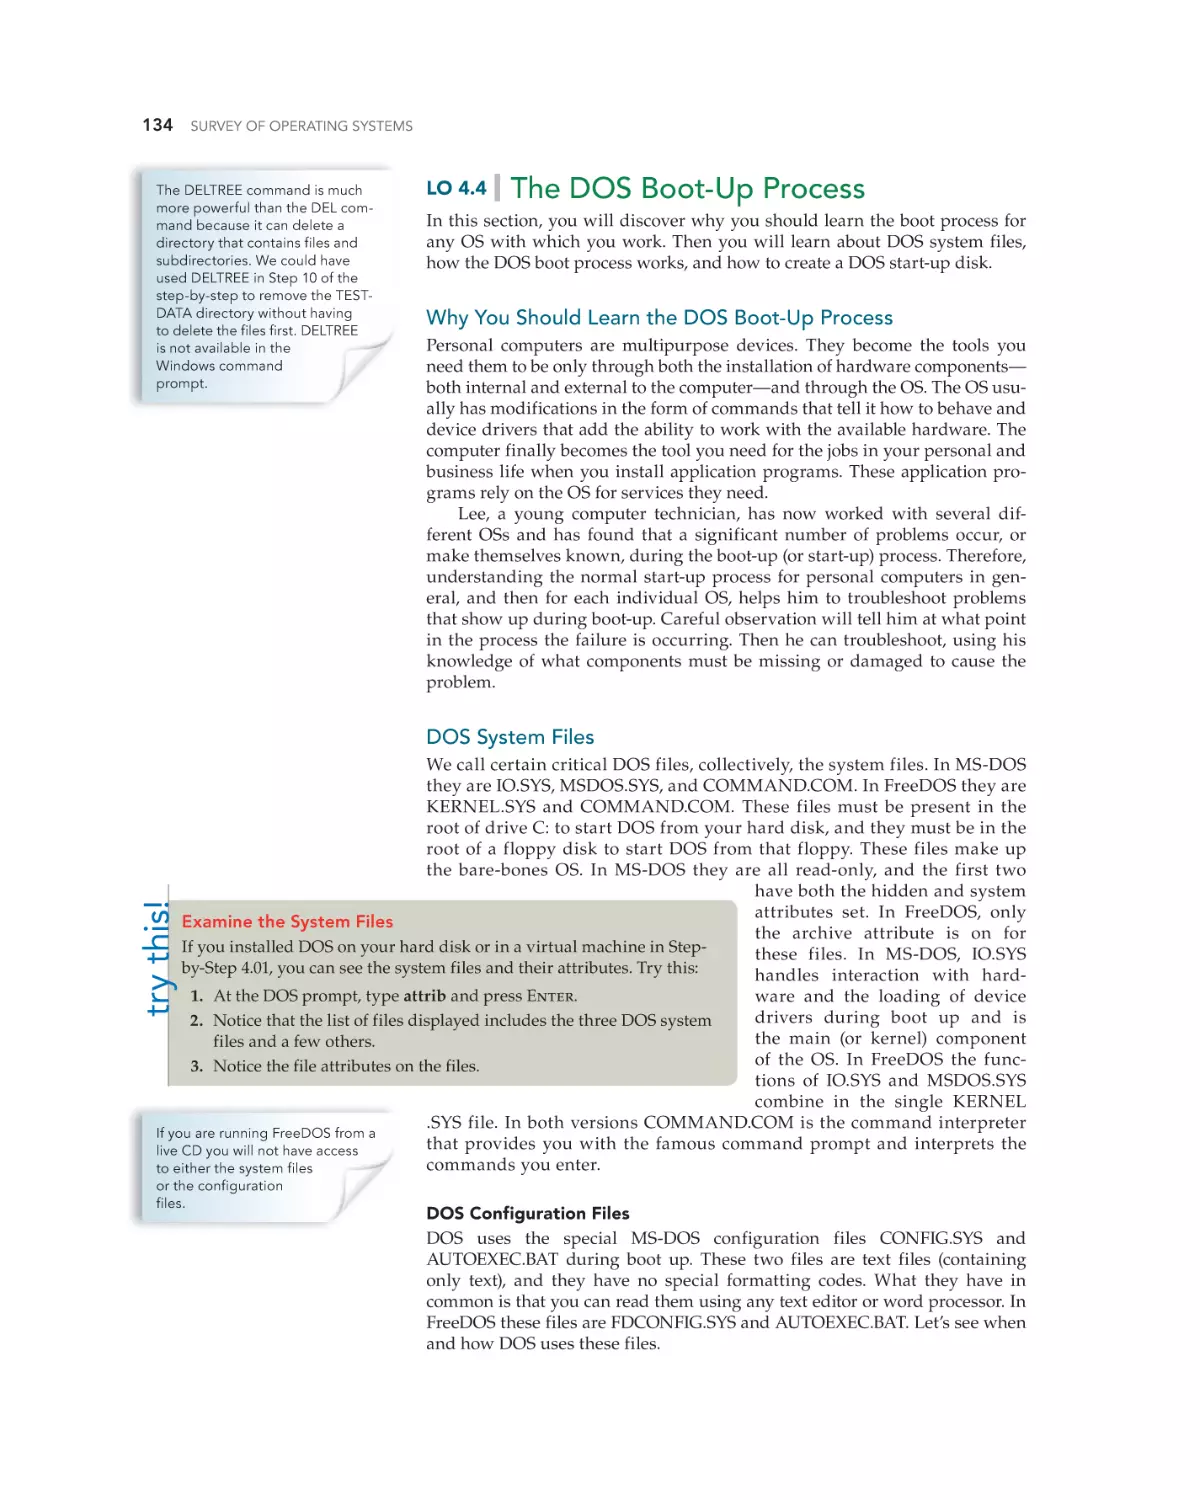 The DOS Boot-Up Process
Why You Should Learn the DOS Boot-Up Process
DOS System Files